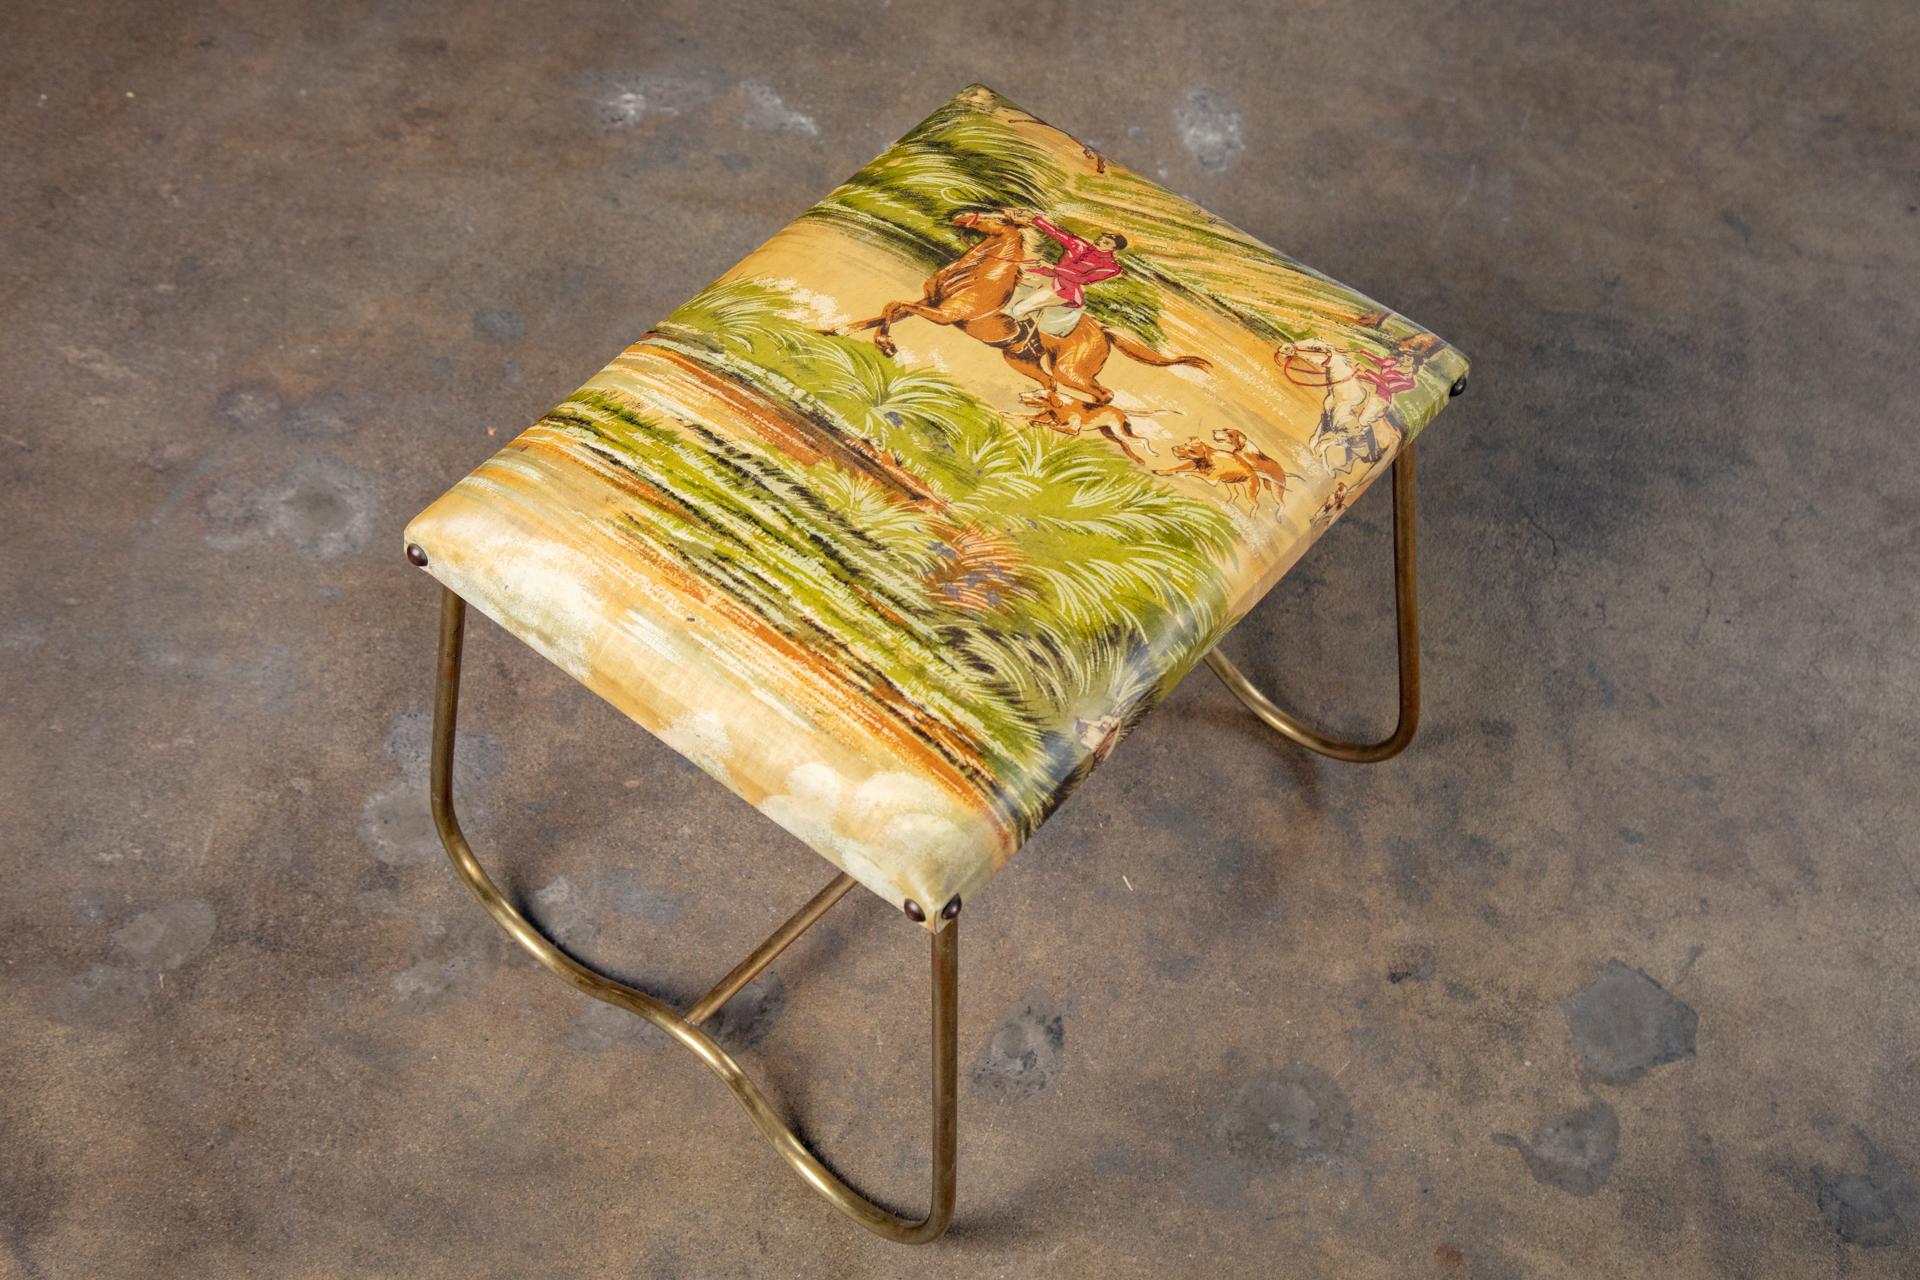 Pair of Midcentury Italian Brass Benches with Equestrian Themed Upholstery 1